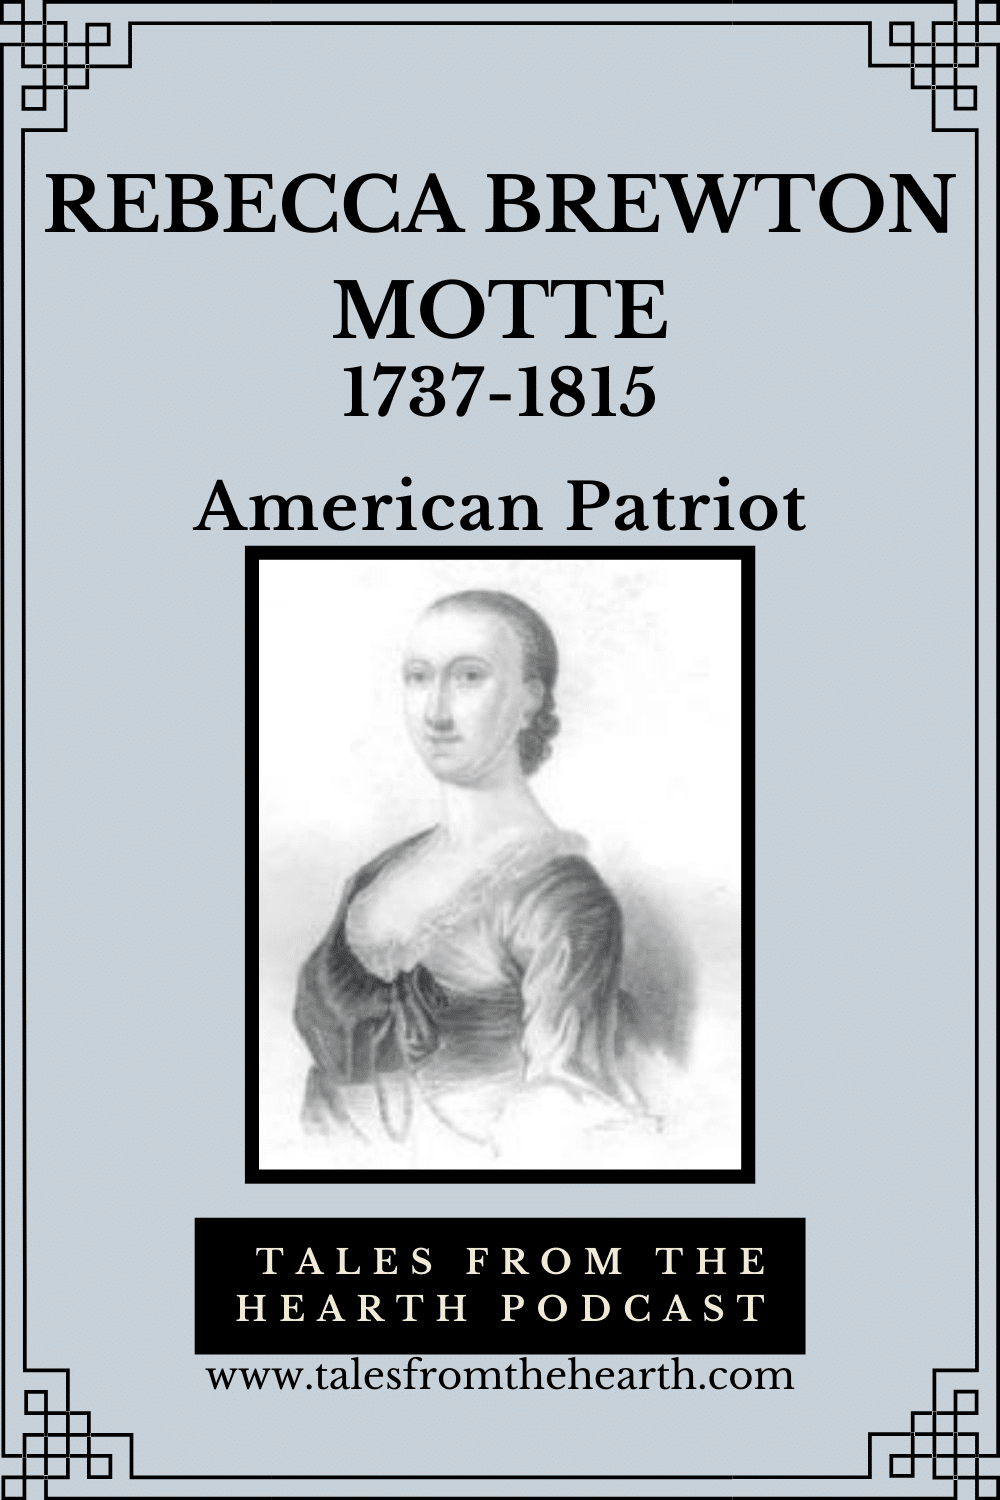 Have you ever thought, “Dealing with my house is so overwhelming, that maybe I should just burn it down”? Today’s featured lady did just that when she found her home filled with enemy soldiers. Join us for today’s episode on South Carolina Patriot Rebecca Brewton Motte. 